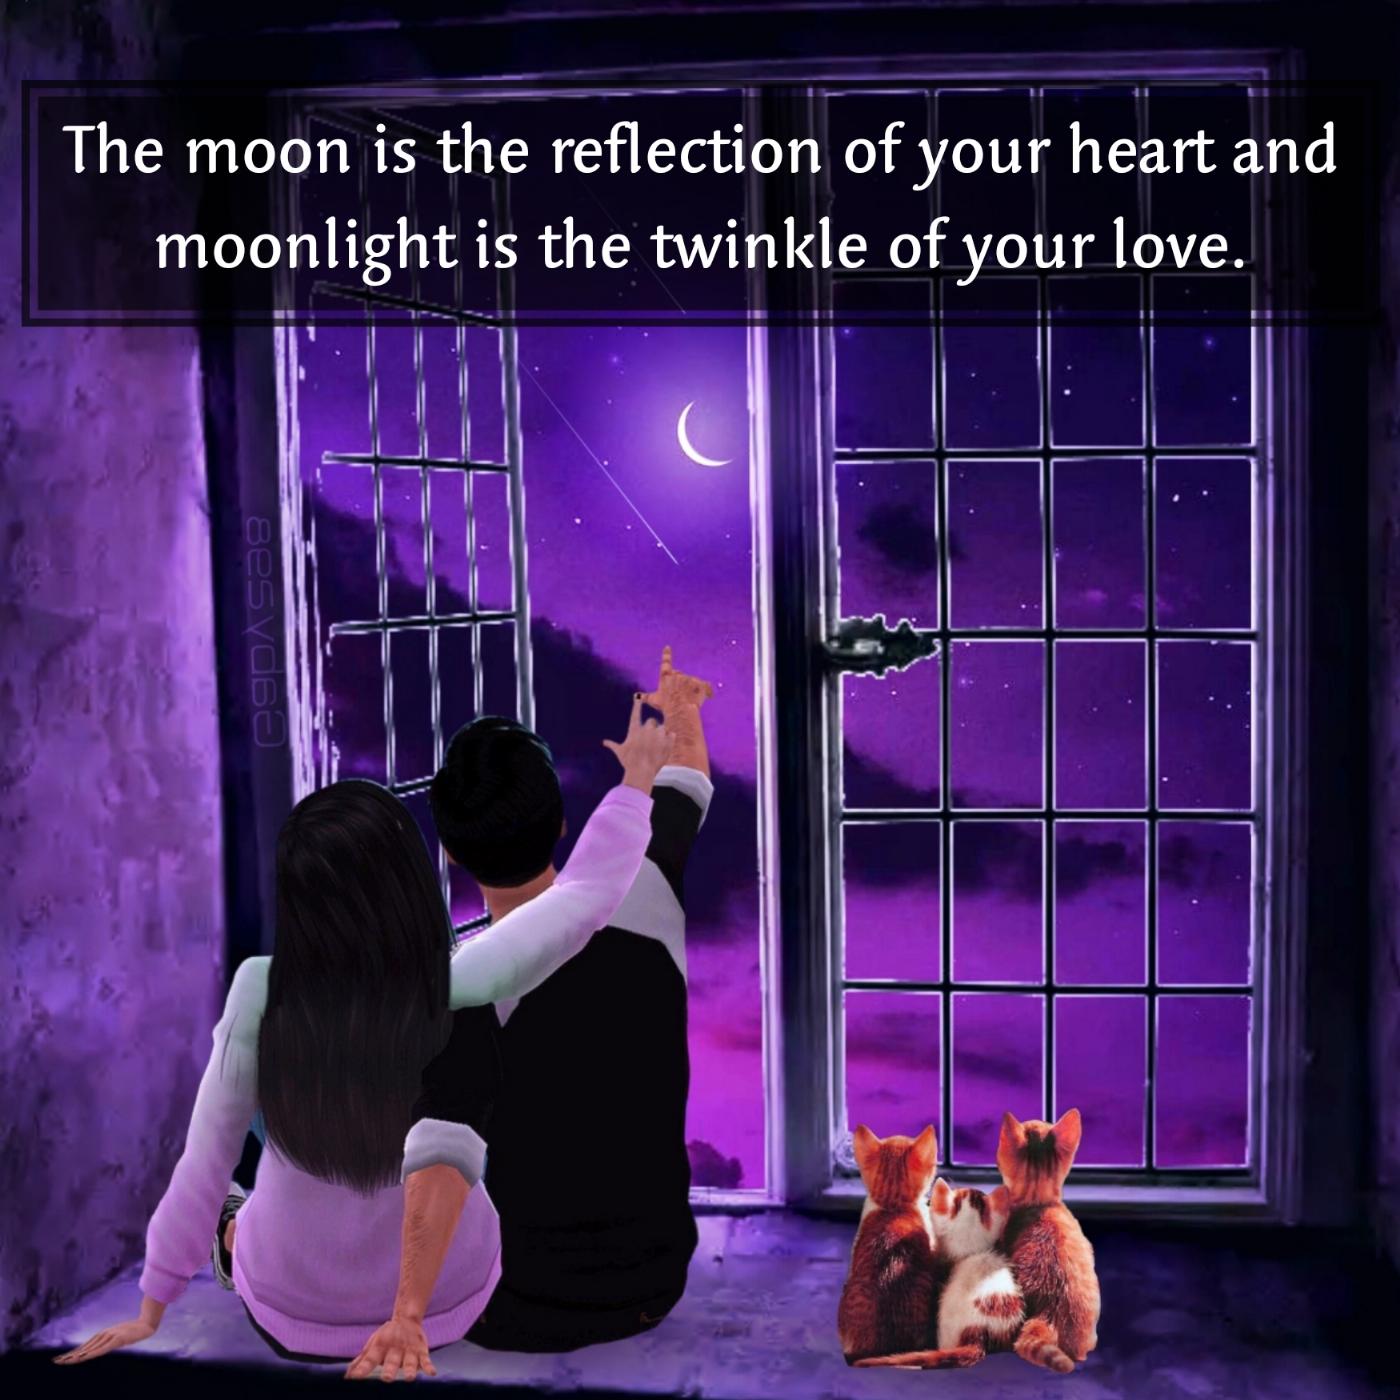 The moon is the reflection of your heart and moonlight is